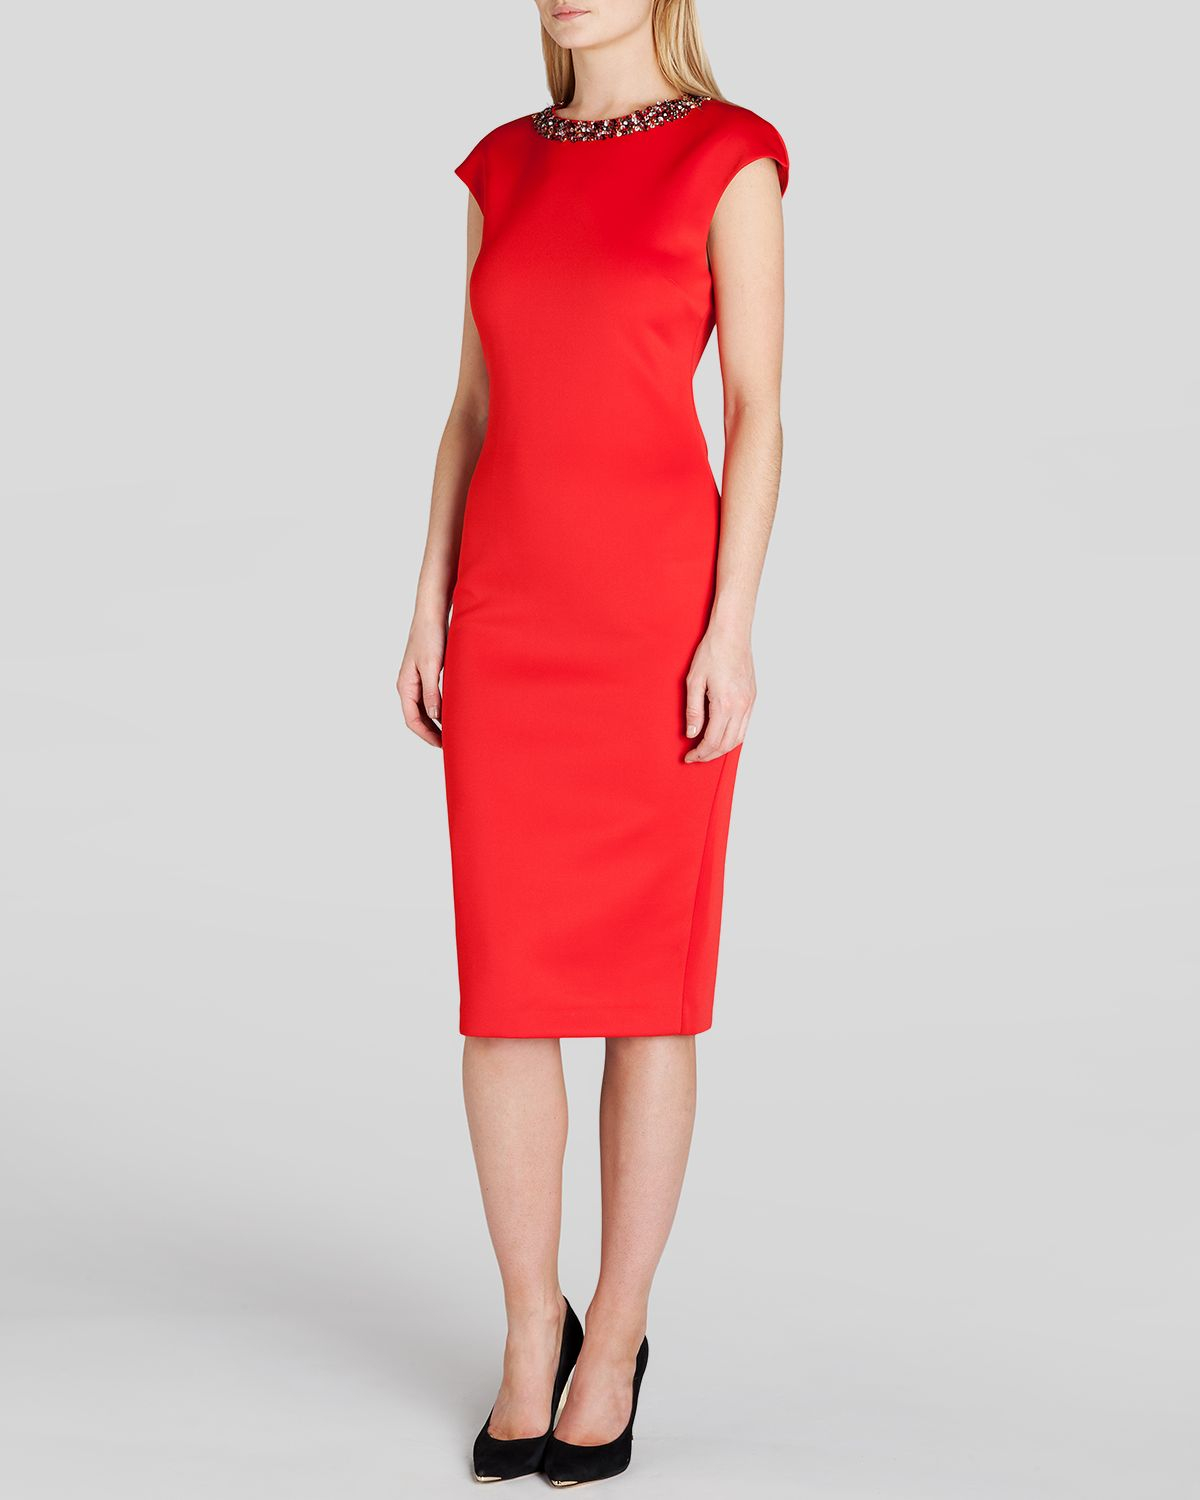 Ted Baker Dress - Elenna Embellished Midi in Light Red (Red) - Lyst